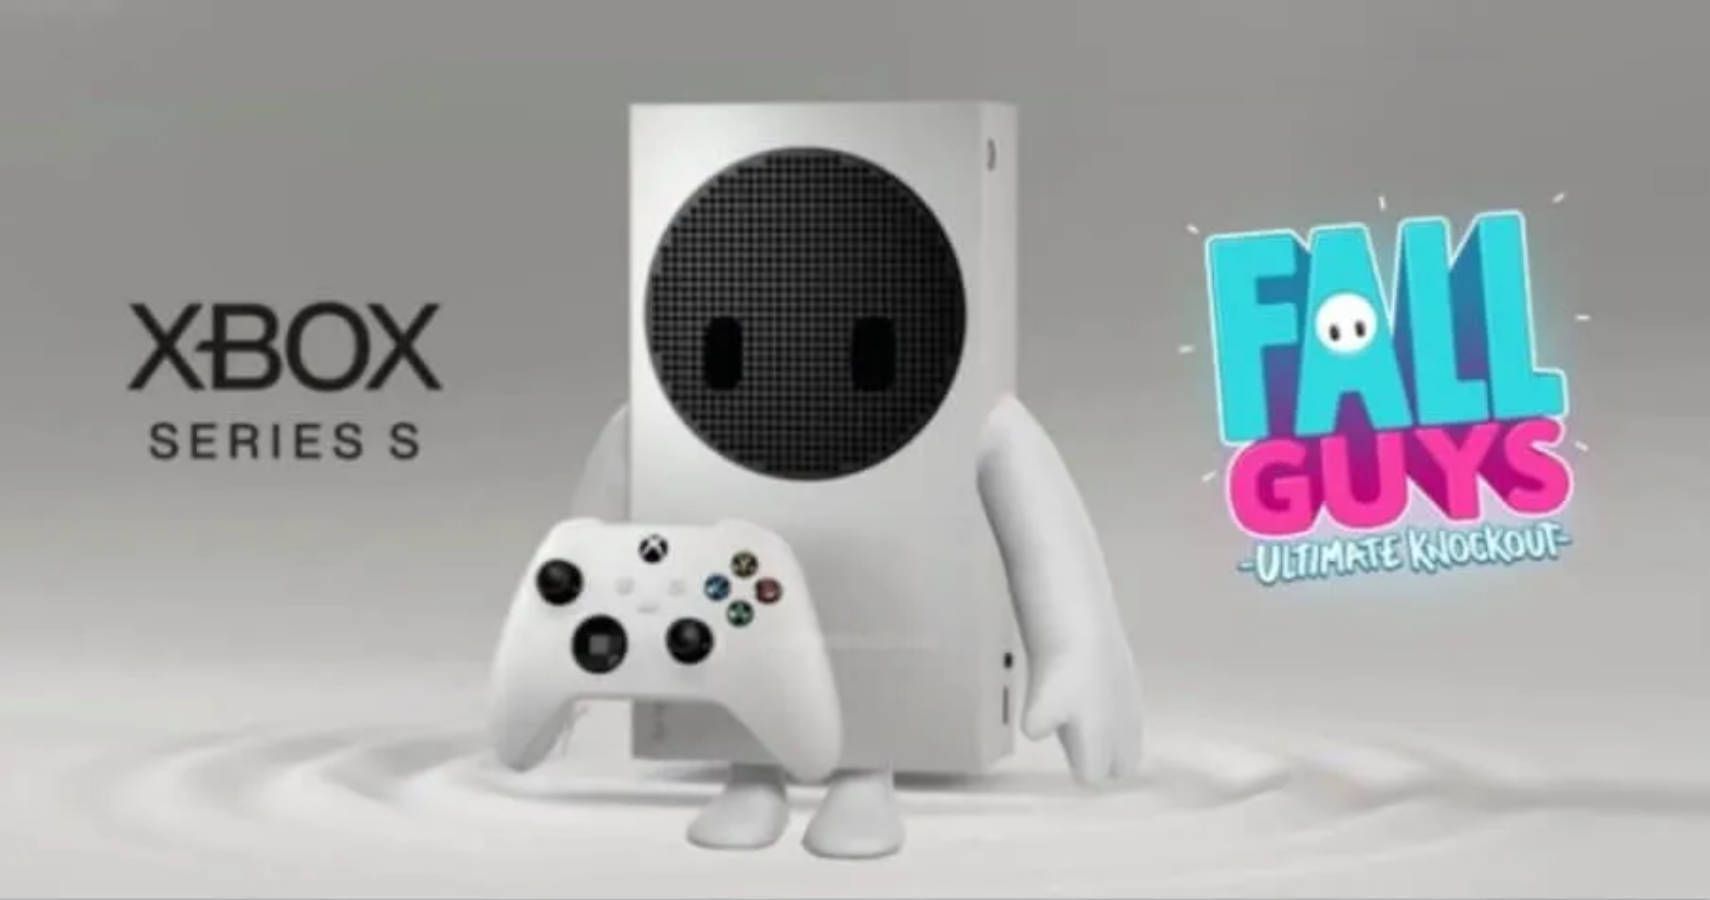 the xbox series x with fall guy arms and legs